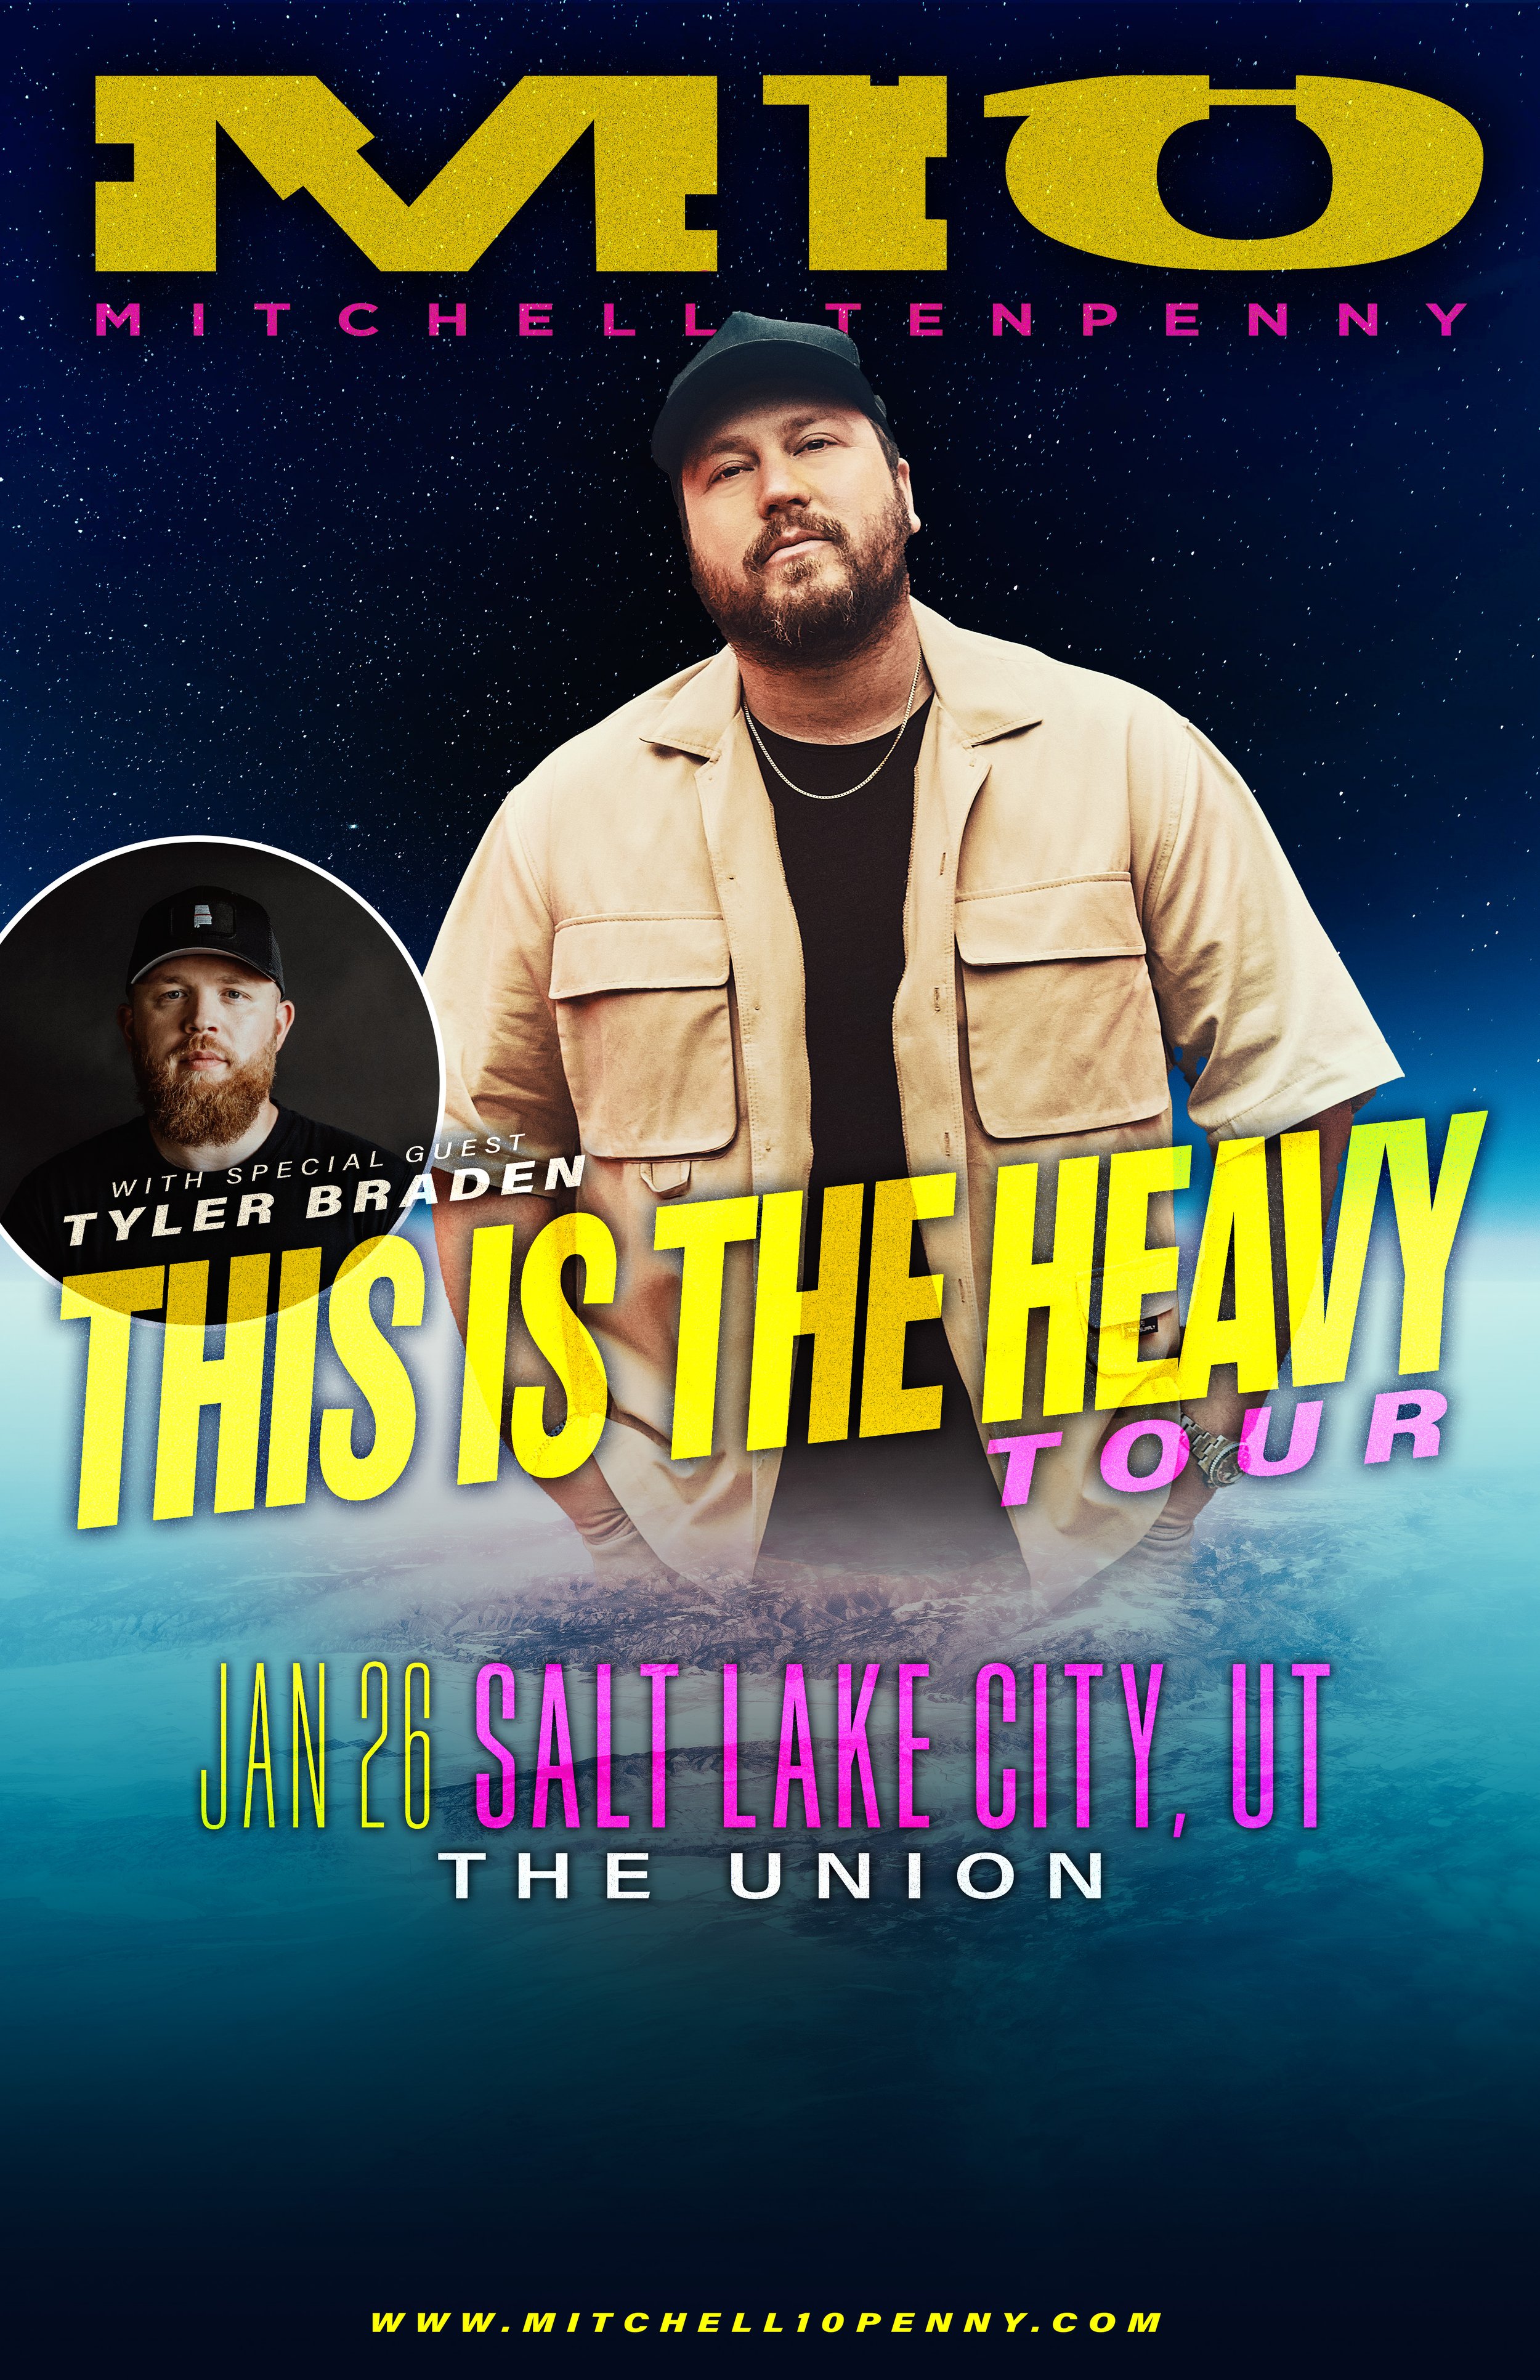 Get Tickets Mitchell Tenpenny in Salt Lake City! — The Union Event Center